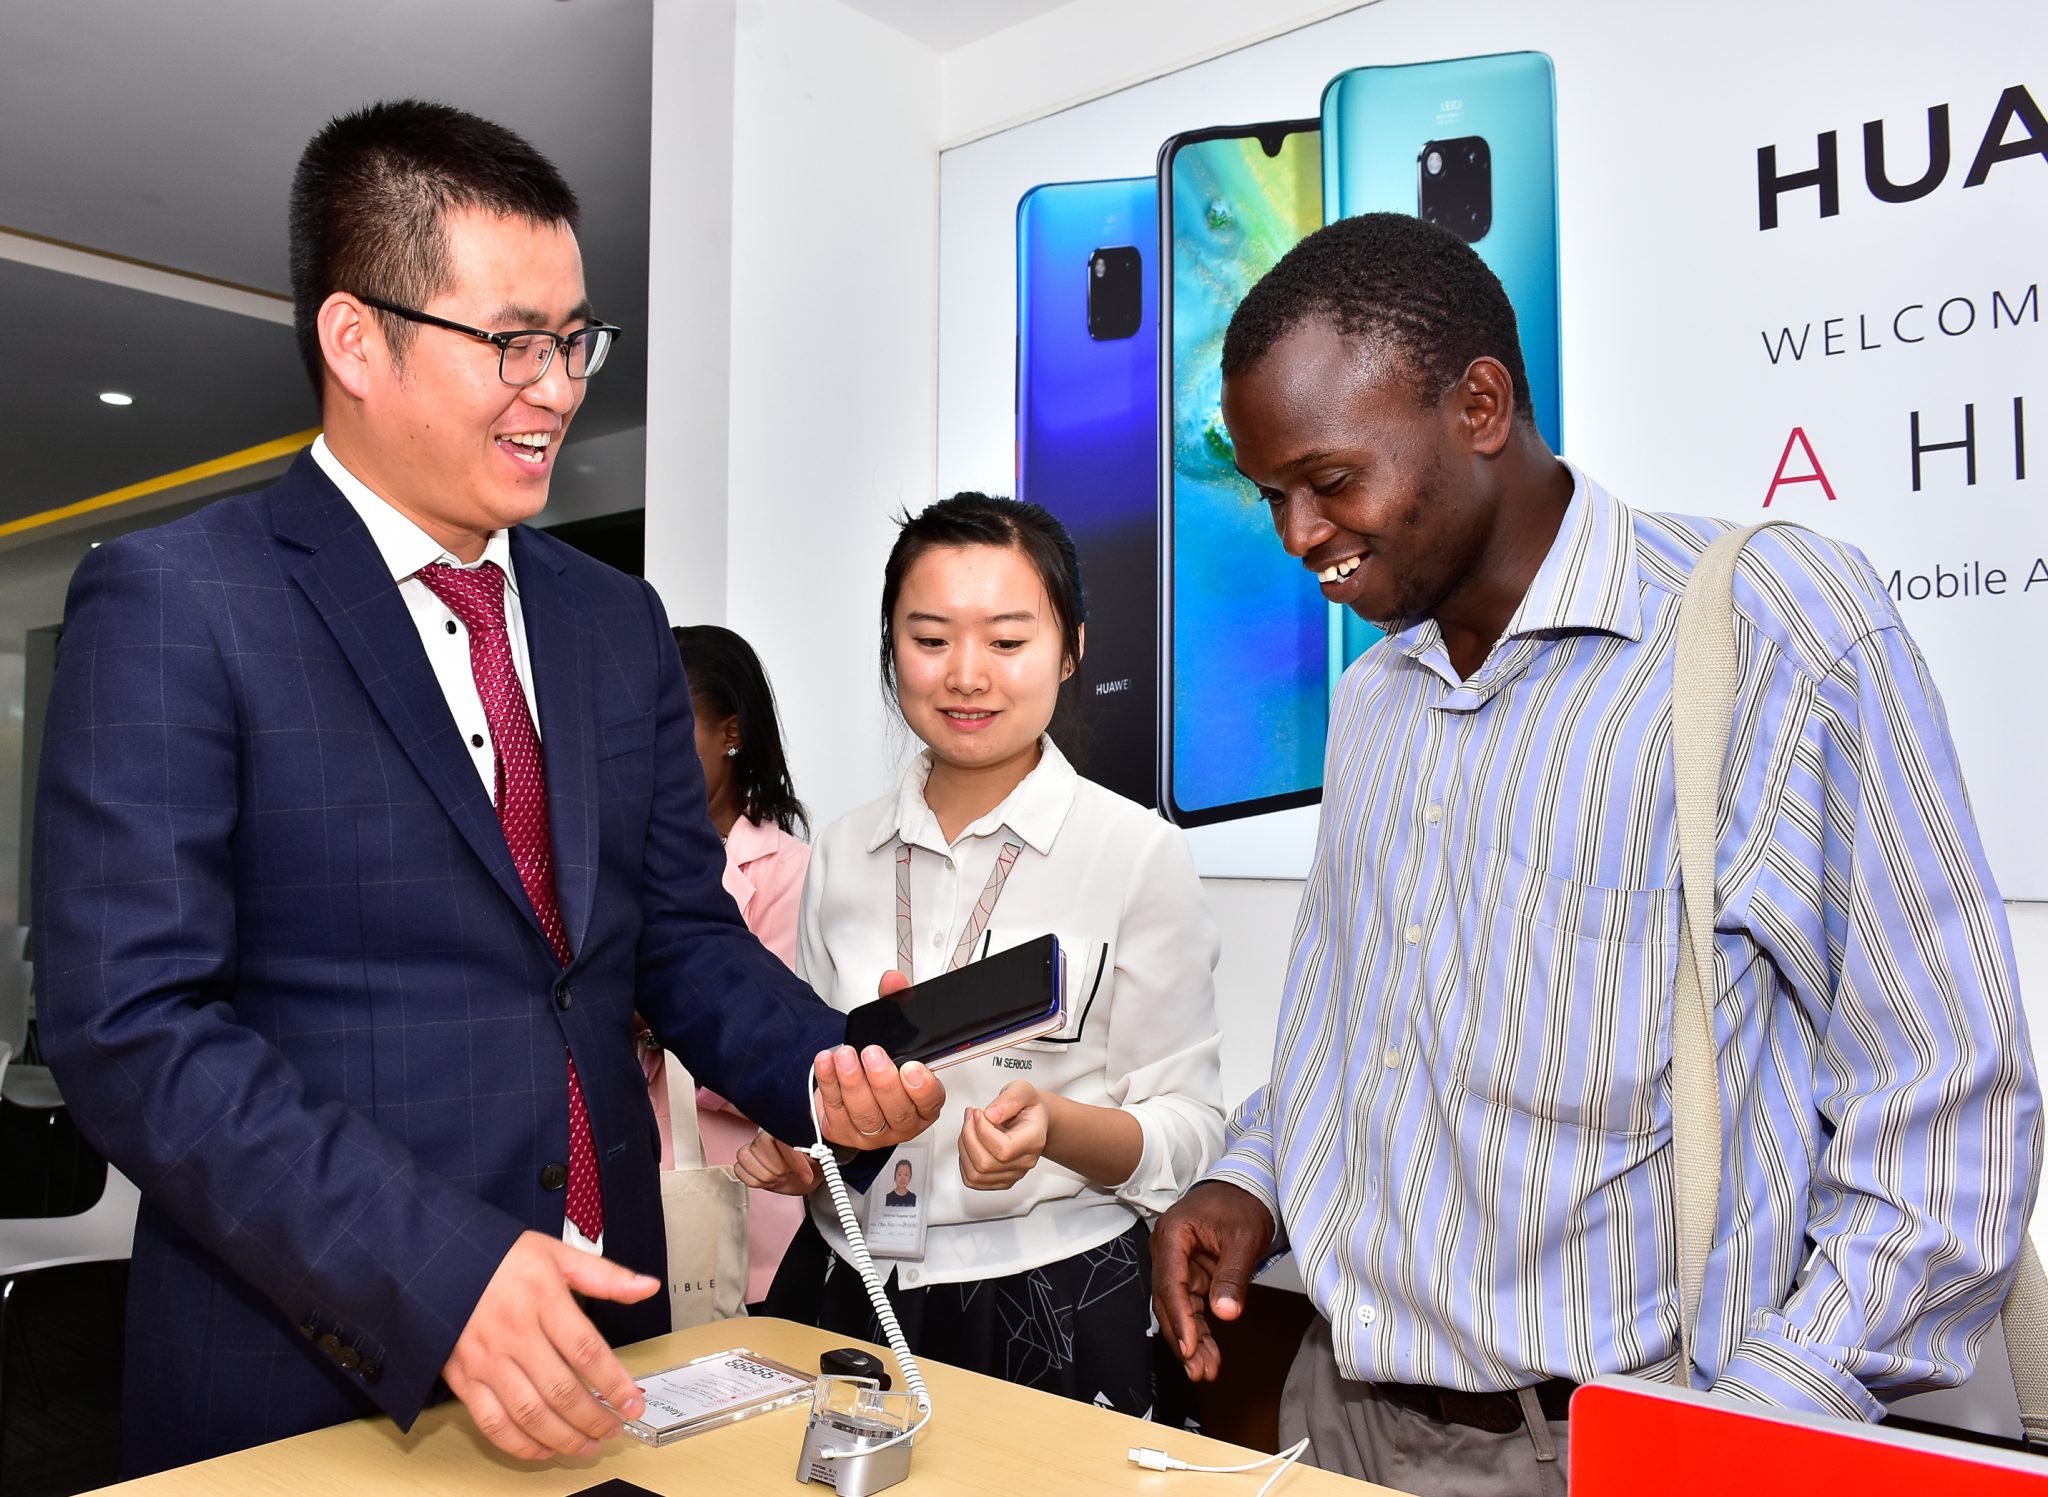 Huawei’s Mate 20 Series with new features now in Kenya